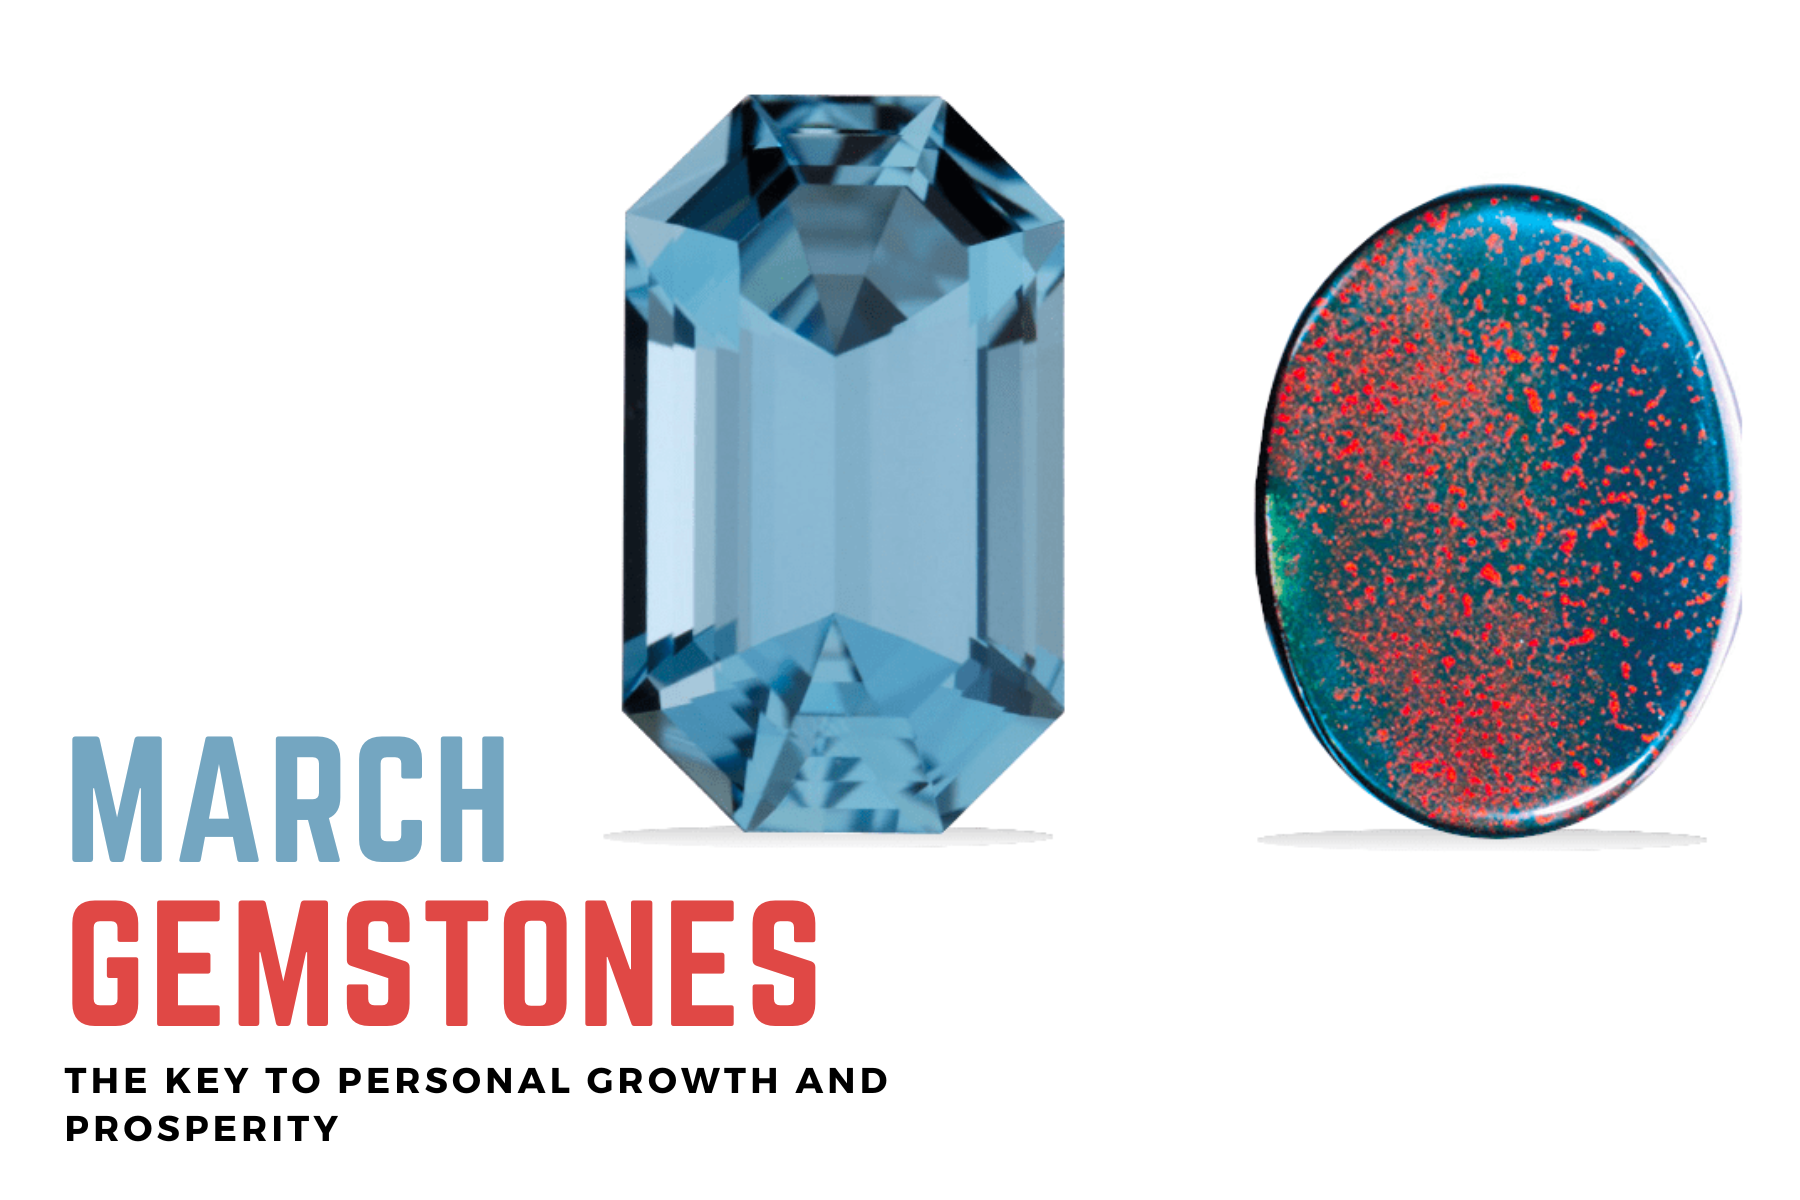 March Gemstones - The Key To Personal Growth And Prosperity